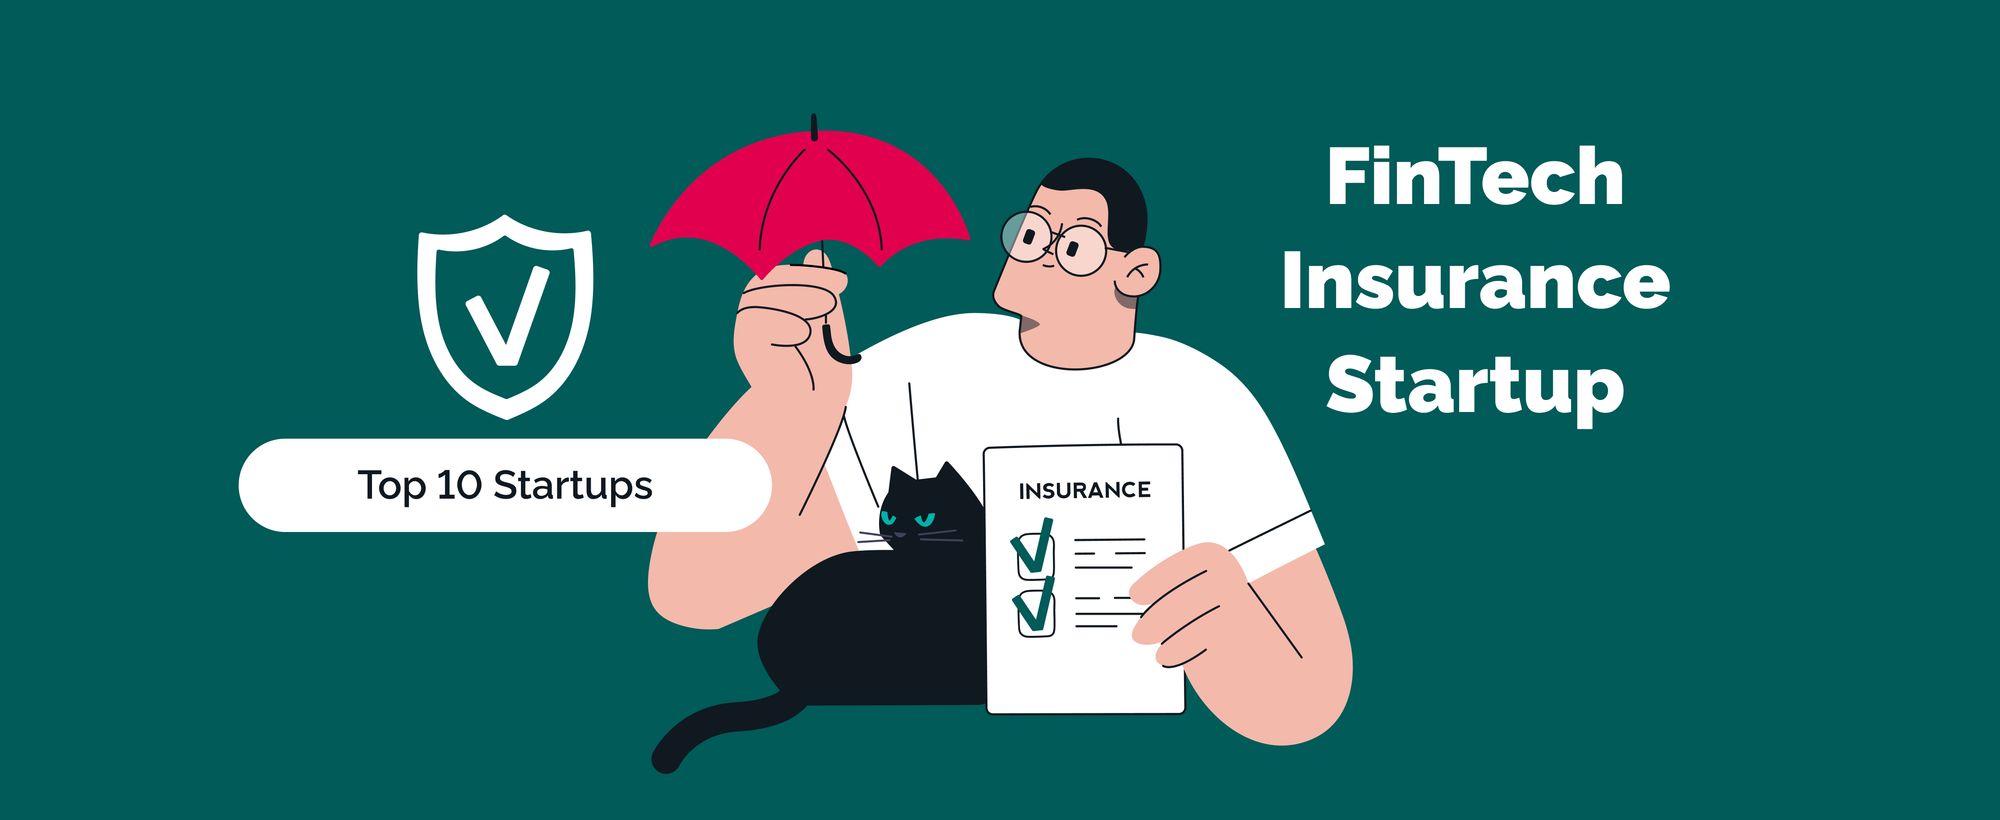 FinTech for Insurance: How Technology is Disrupting the Insurance Industry